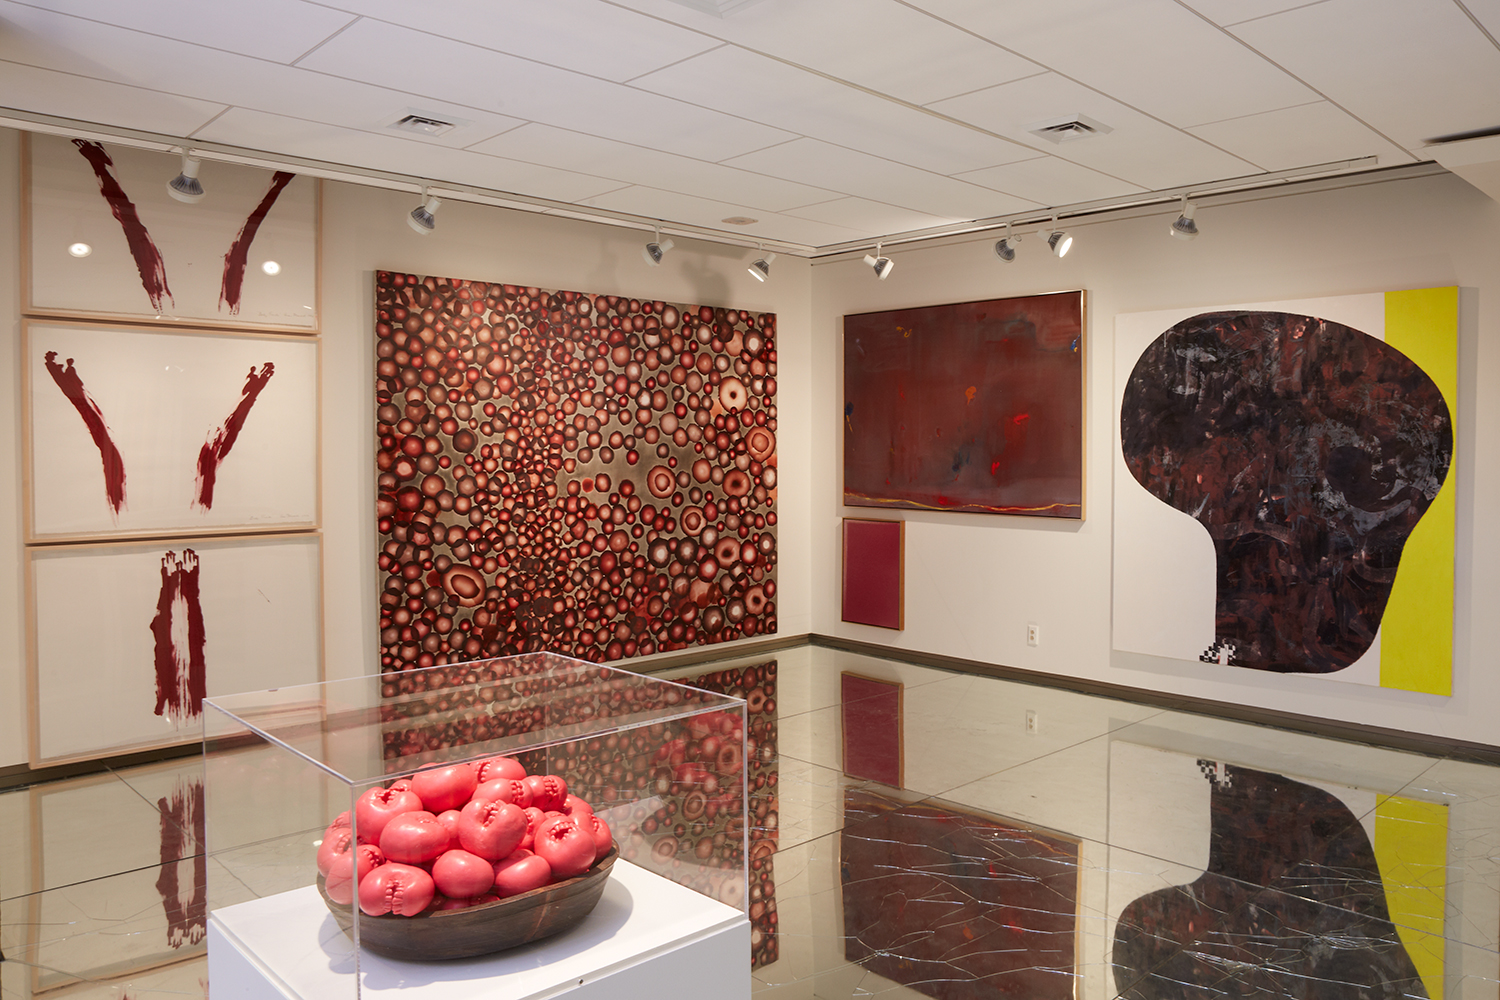   On the Matter of Abstraction (figs. A &amp; B): Parallel Exhibitions of Post-War Non-Figurative Art from the Collection , Rose Art Museum, Brandeis University, Waltham, MA, 2013—in collaboration with Rose Art Museum Director Christopher Bedford. Ro